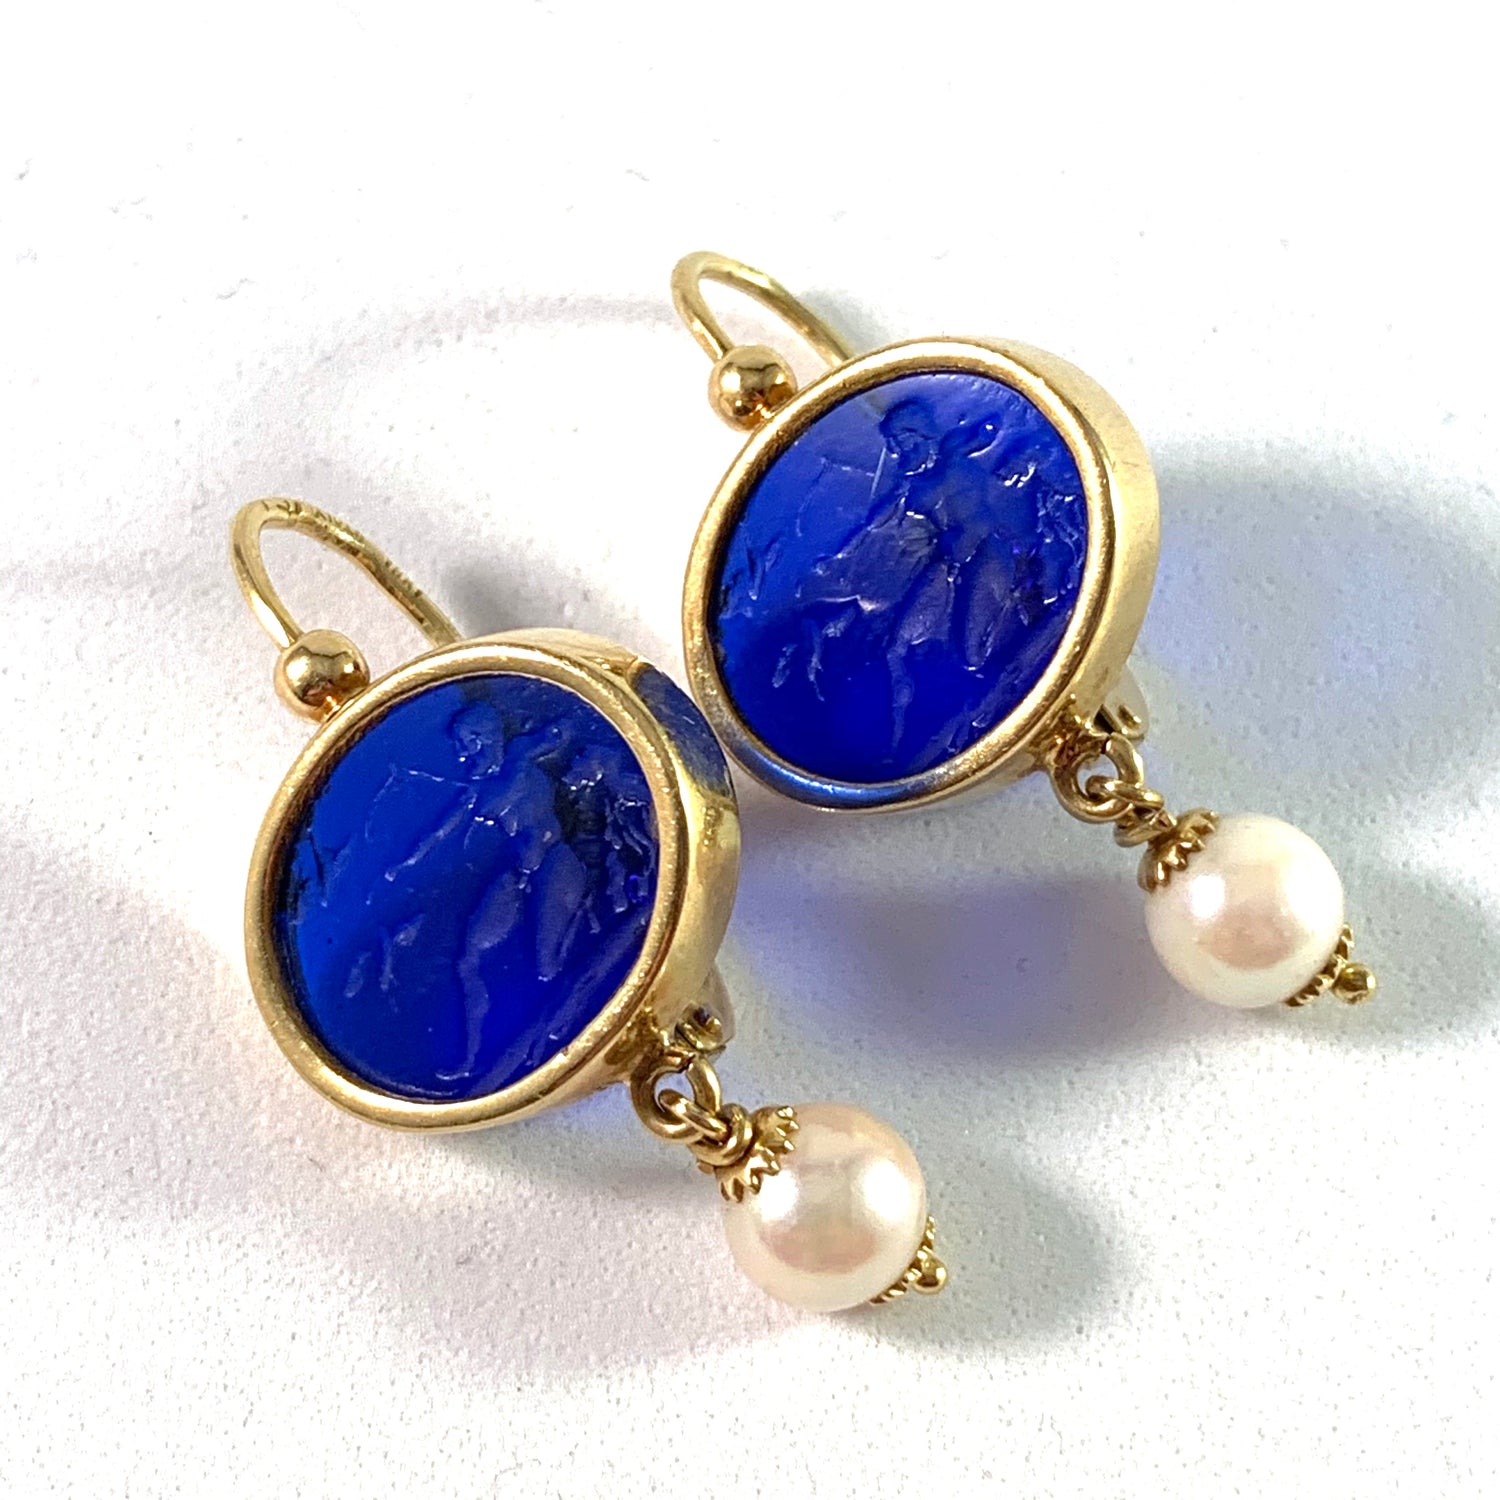 Vintage and antique earrings